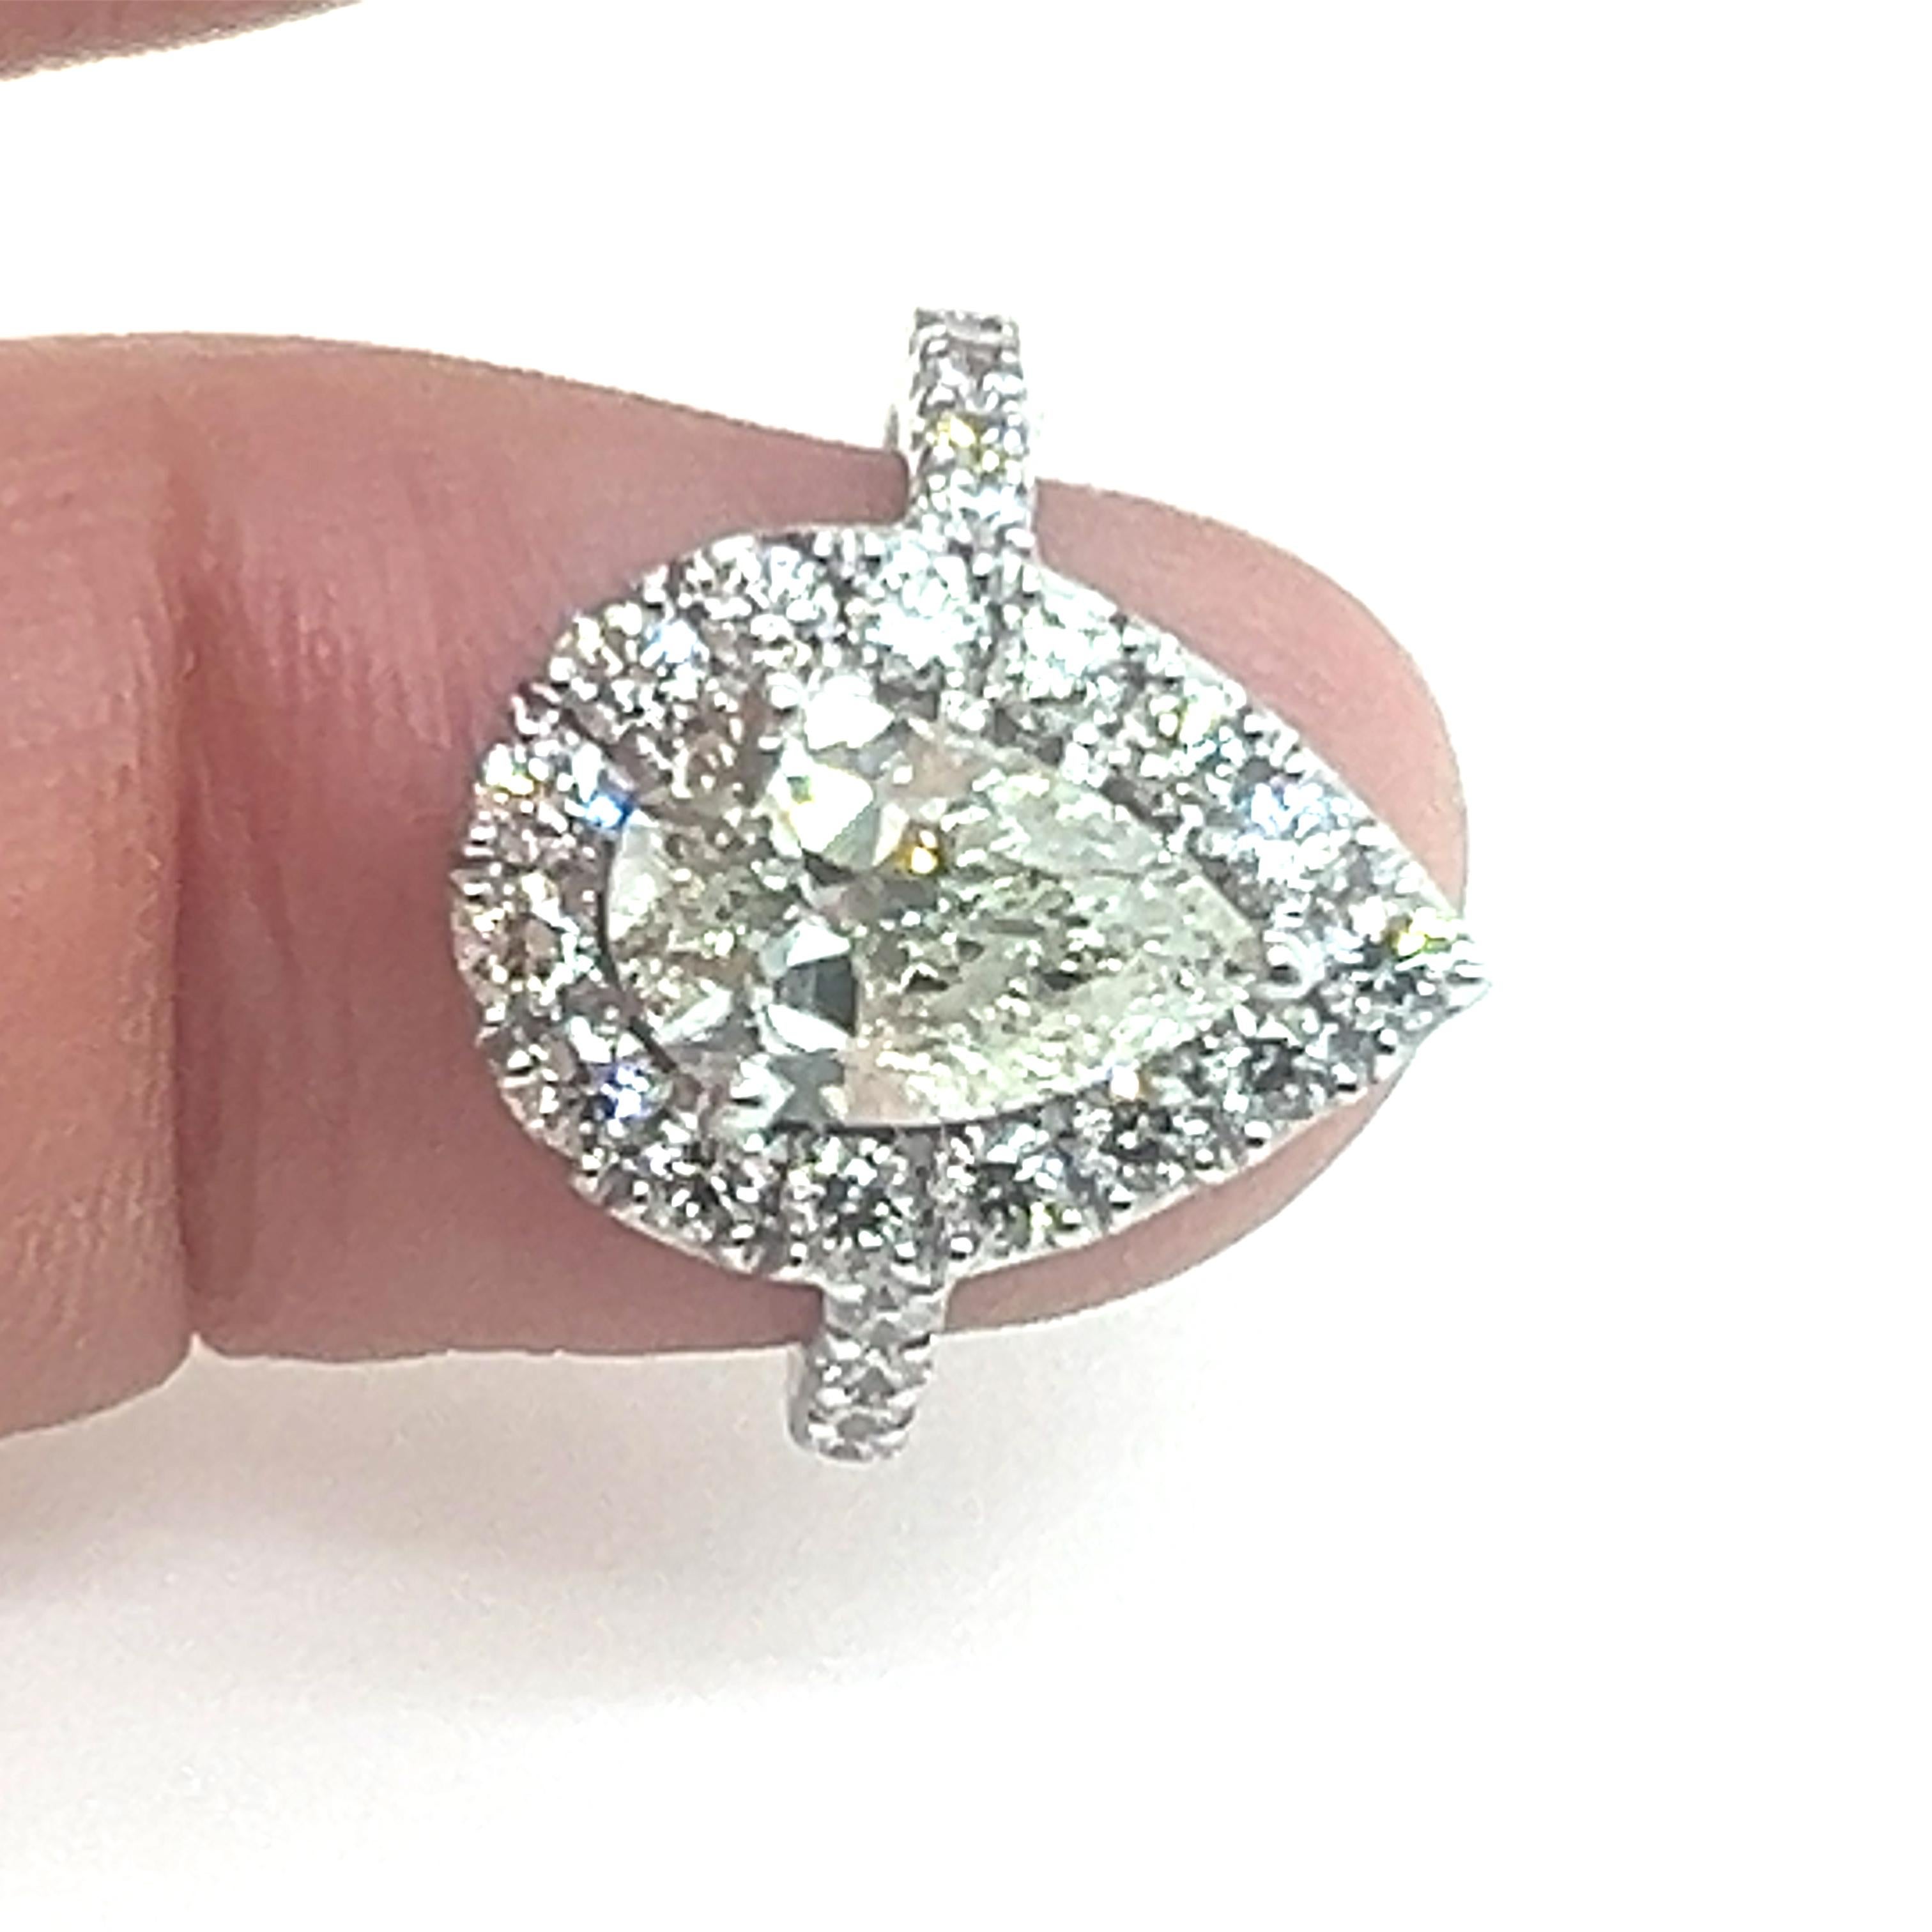 Bespoke Diamond Pear Cluster Ring 2.98ct For Sale 2